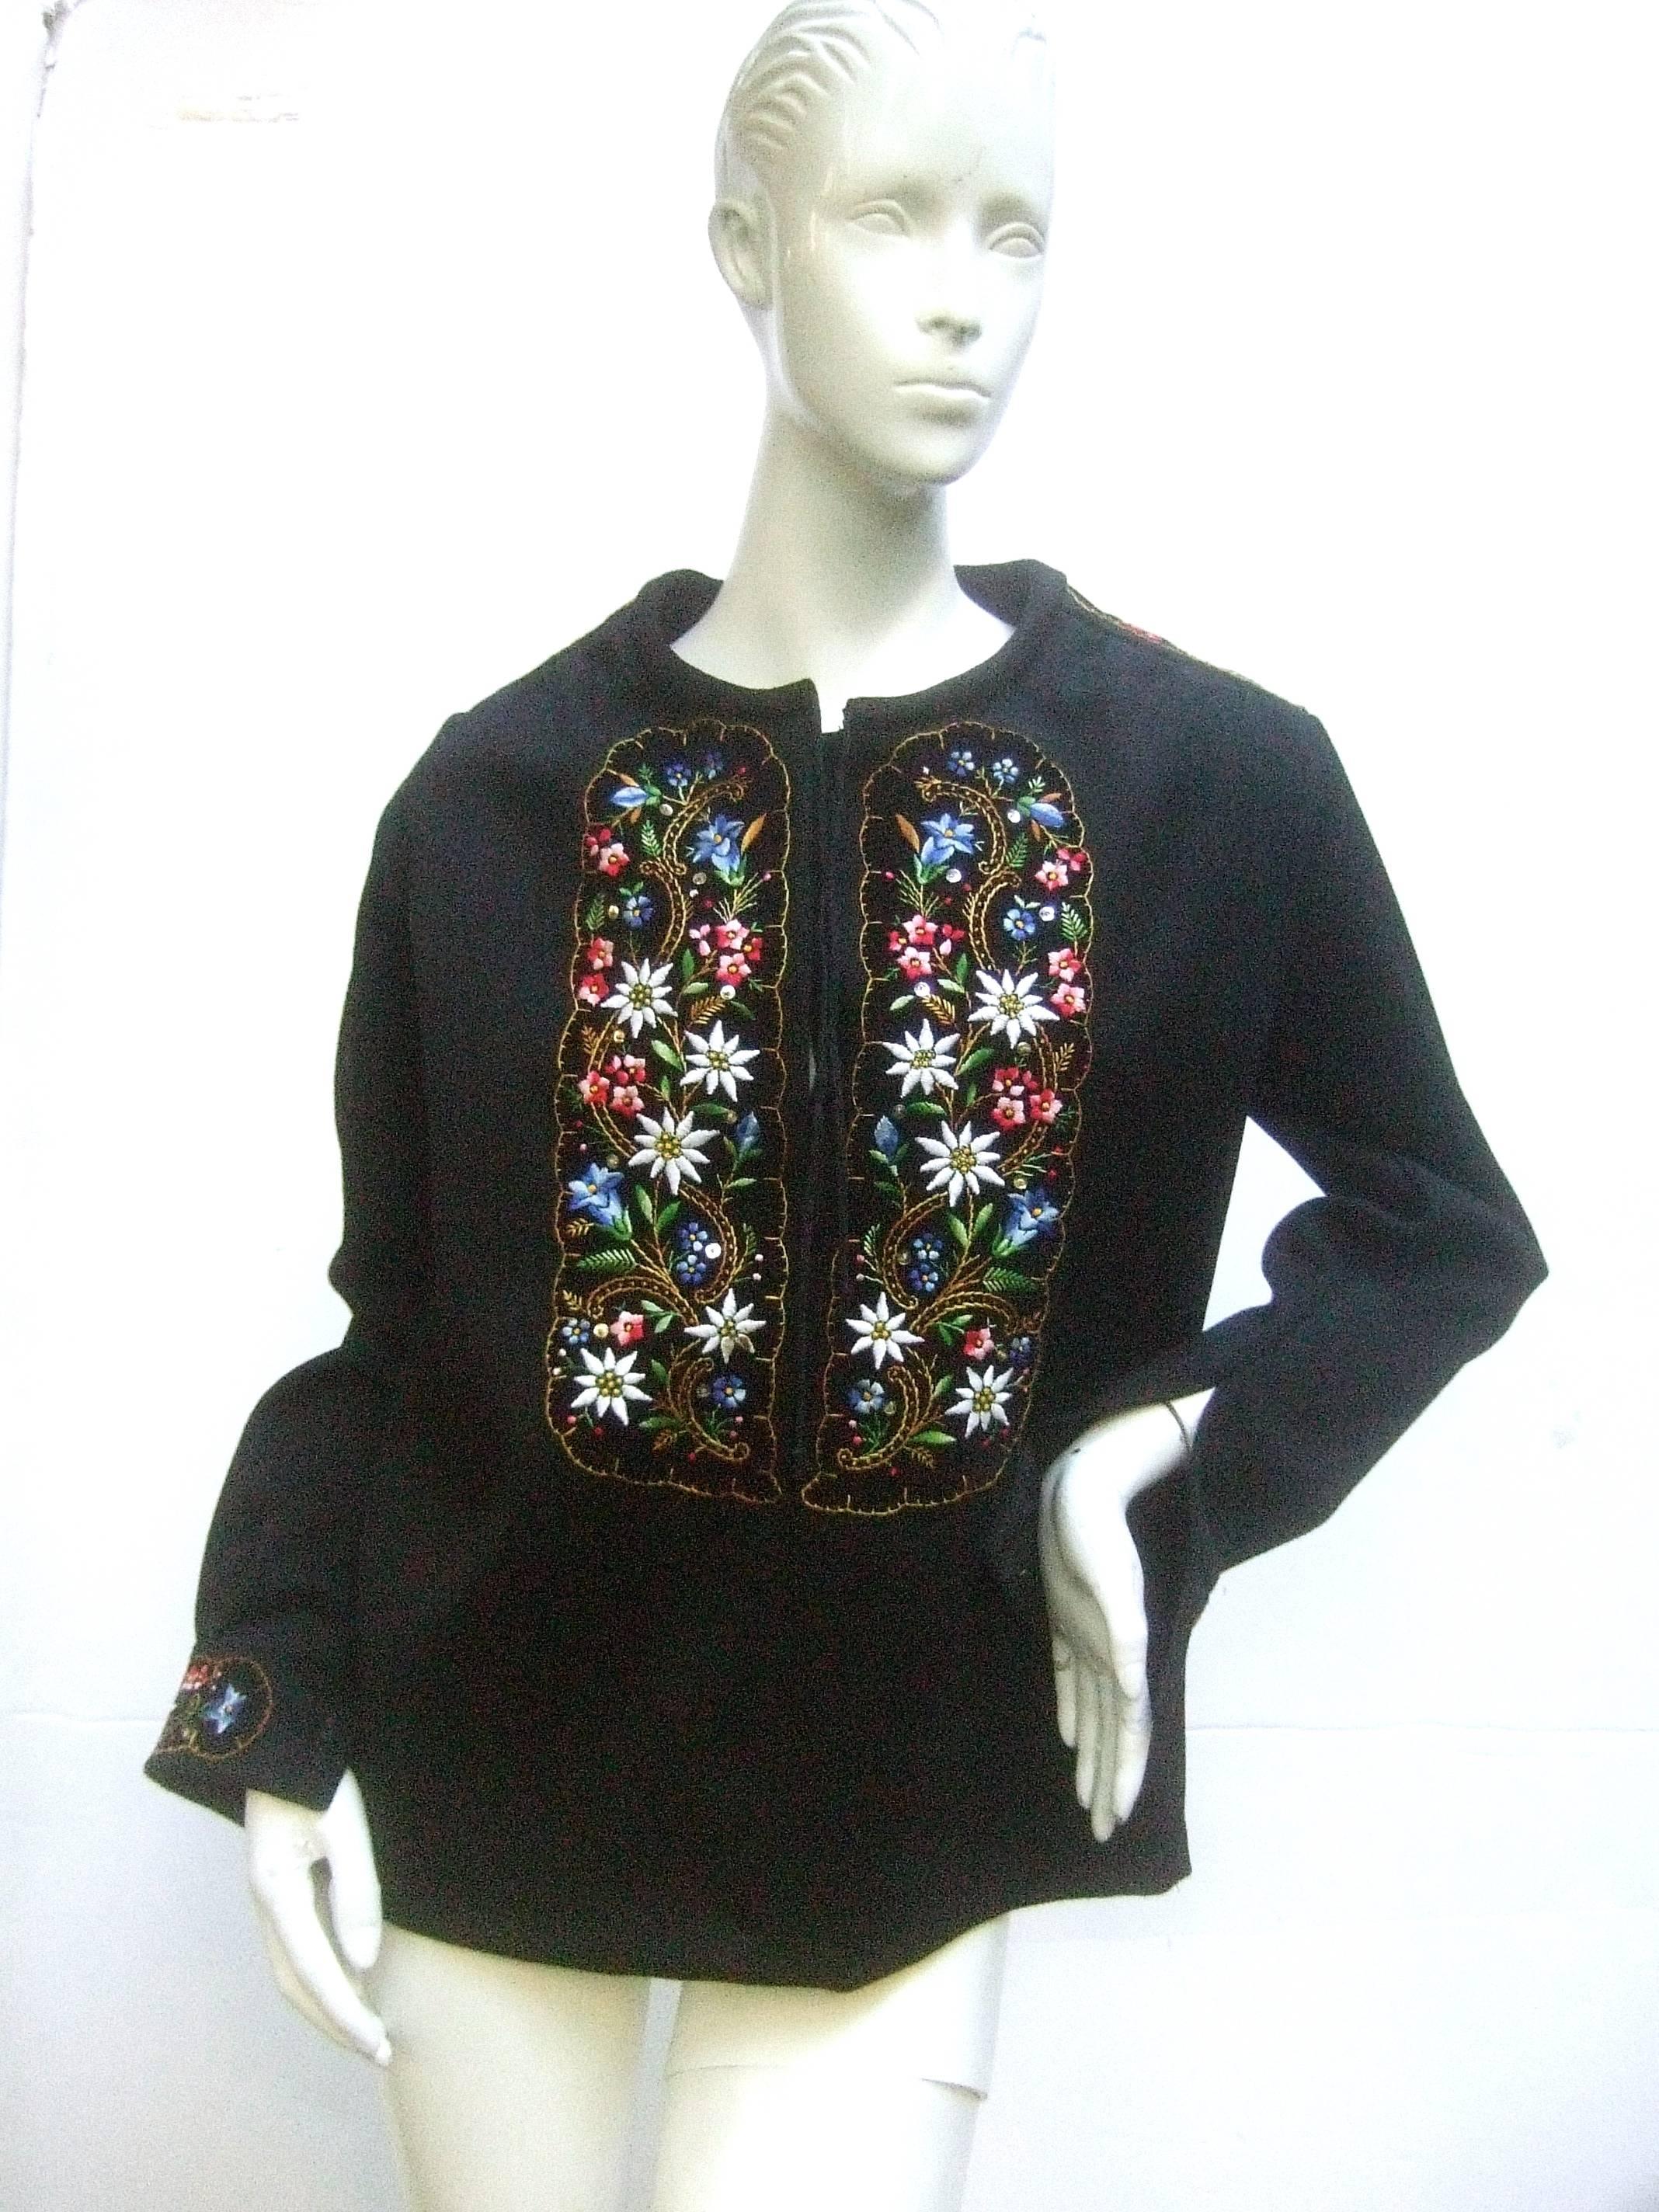 Women's Saks Fifth Avenue Embroidered Black Wool Tunic from Switzerland c 1970s 